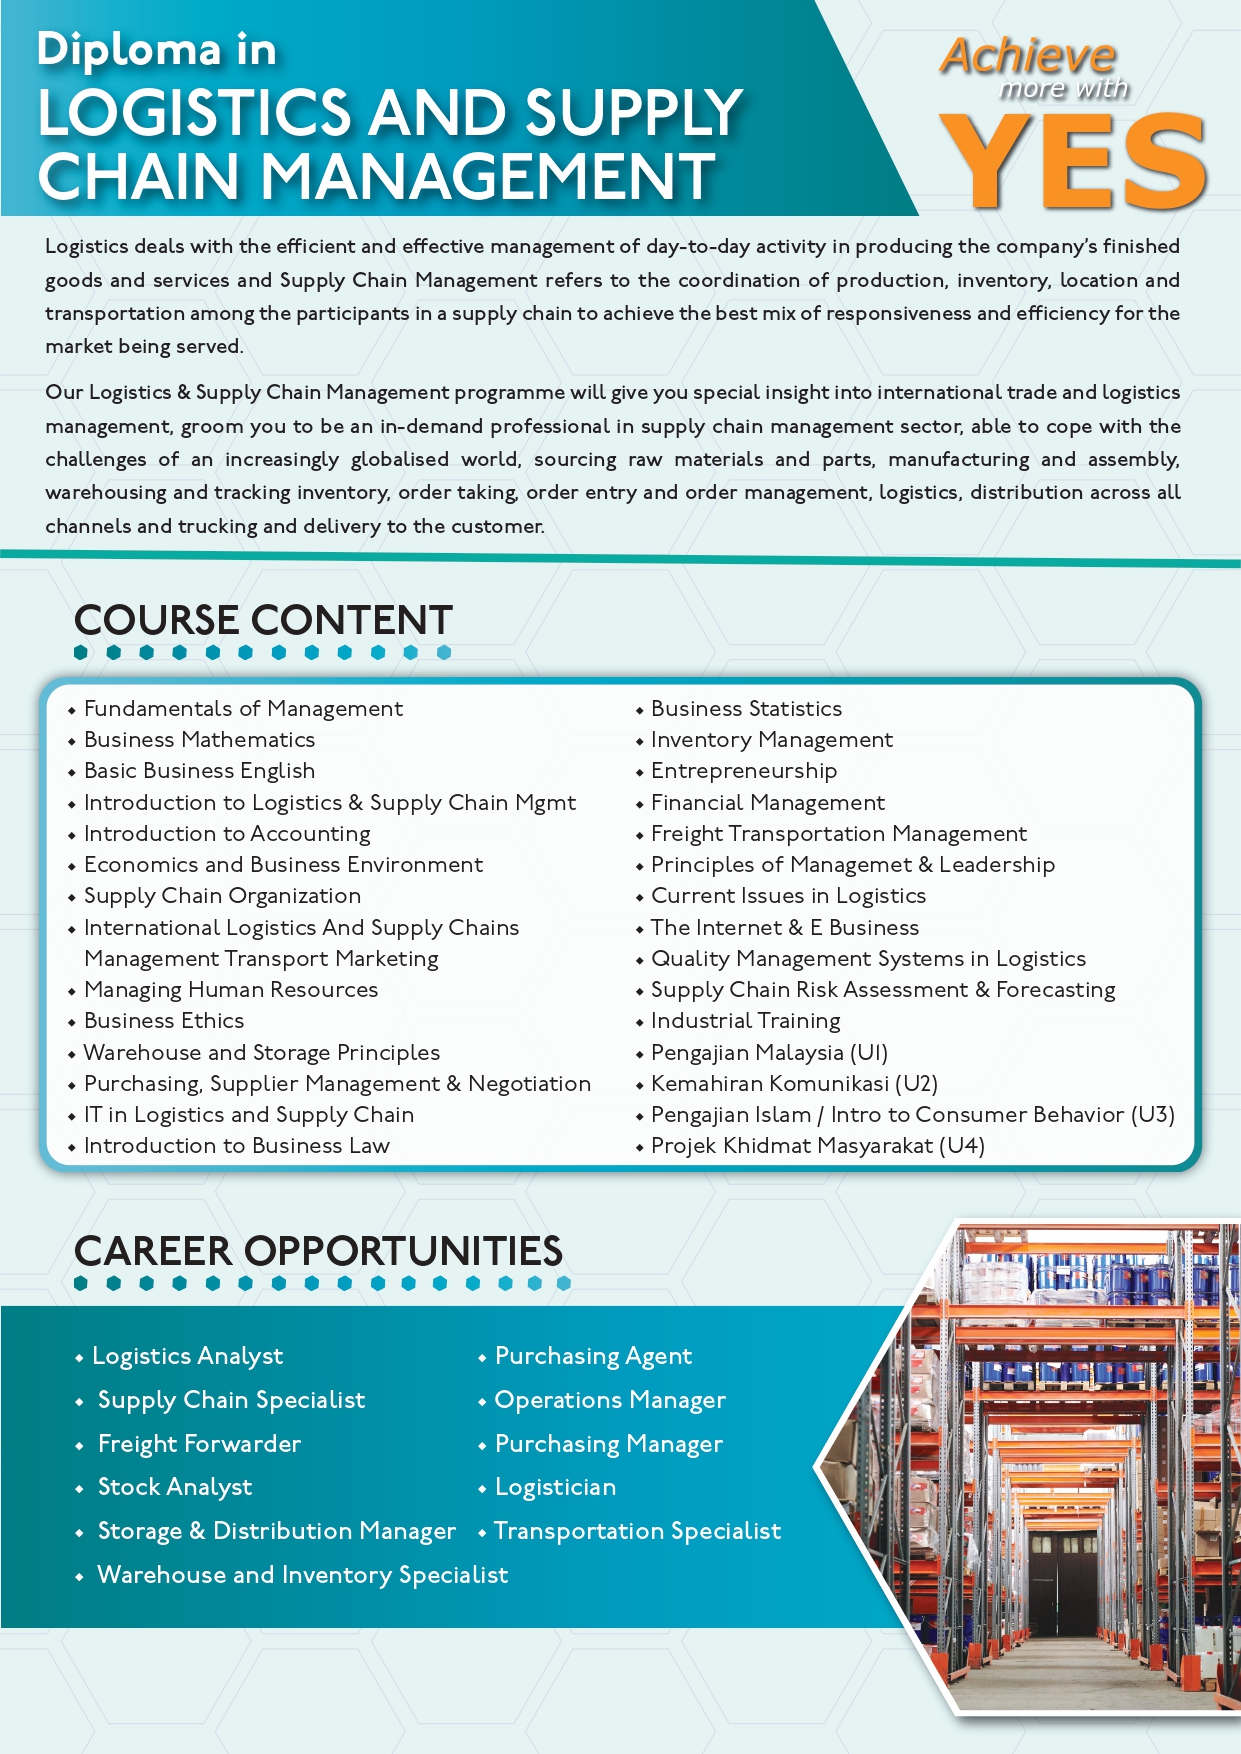 DIPLOMA IN LOGISTICS AND SUPPLY CHAIN MANAGEMENT by YES INTERNATIONAL COLLEGE